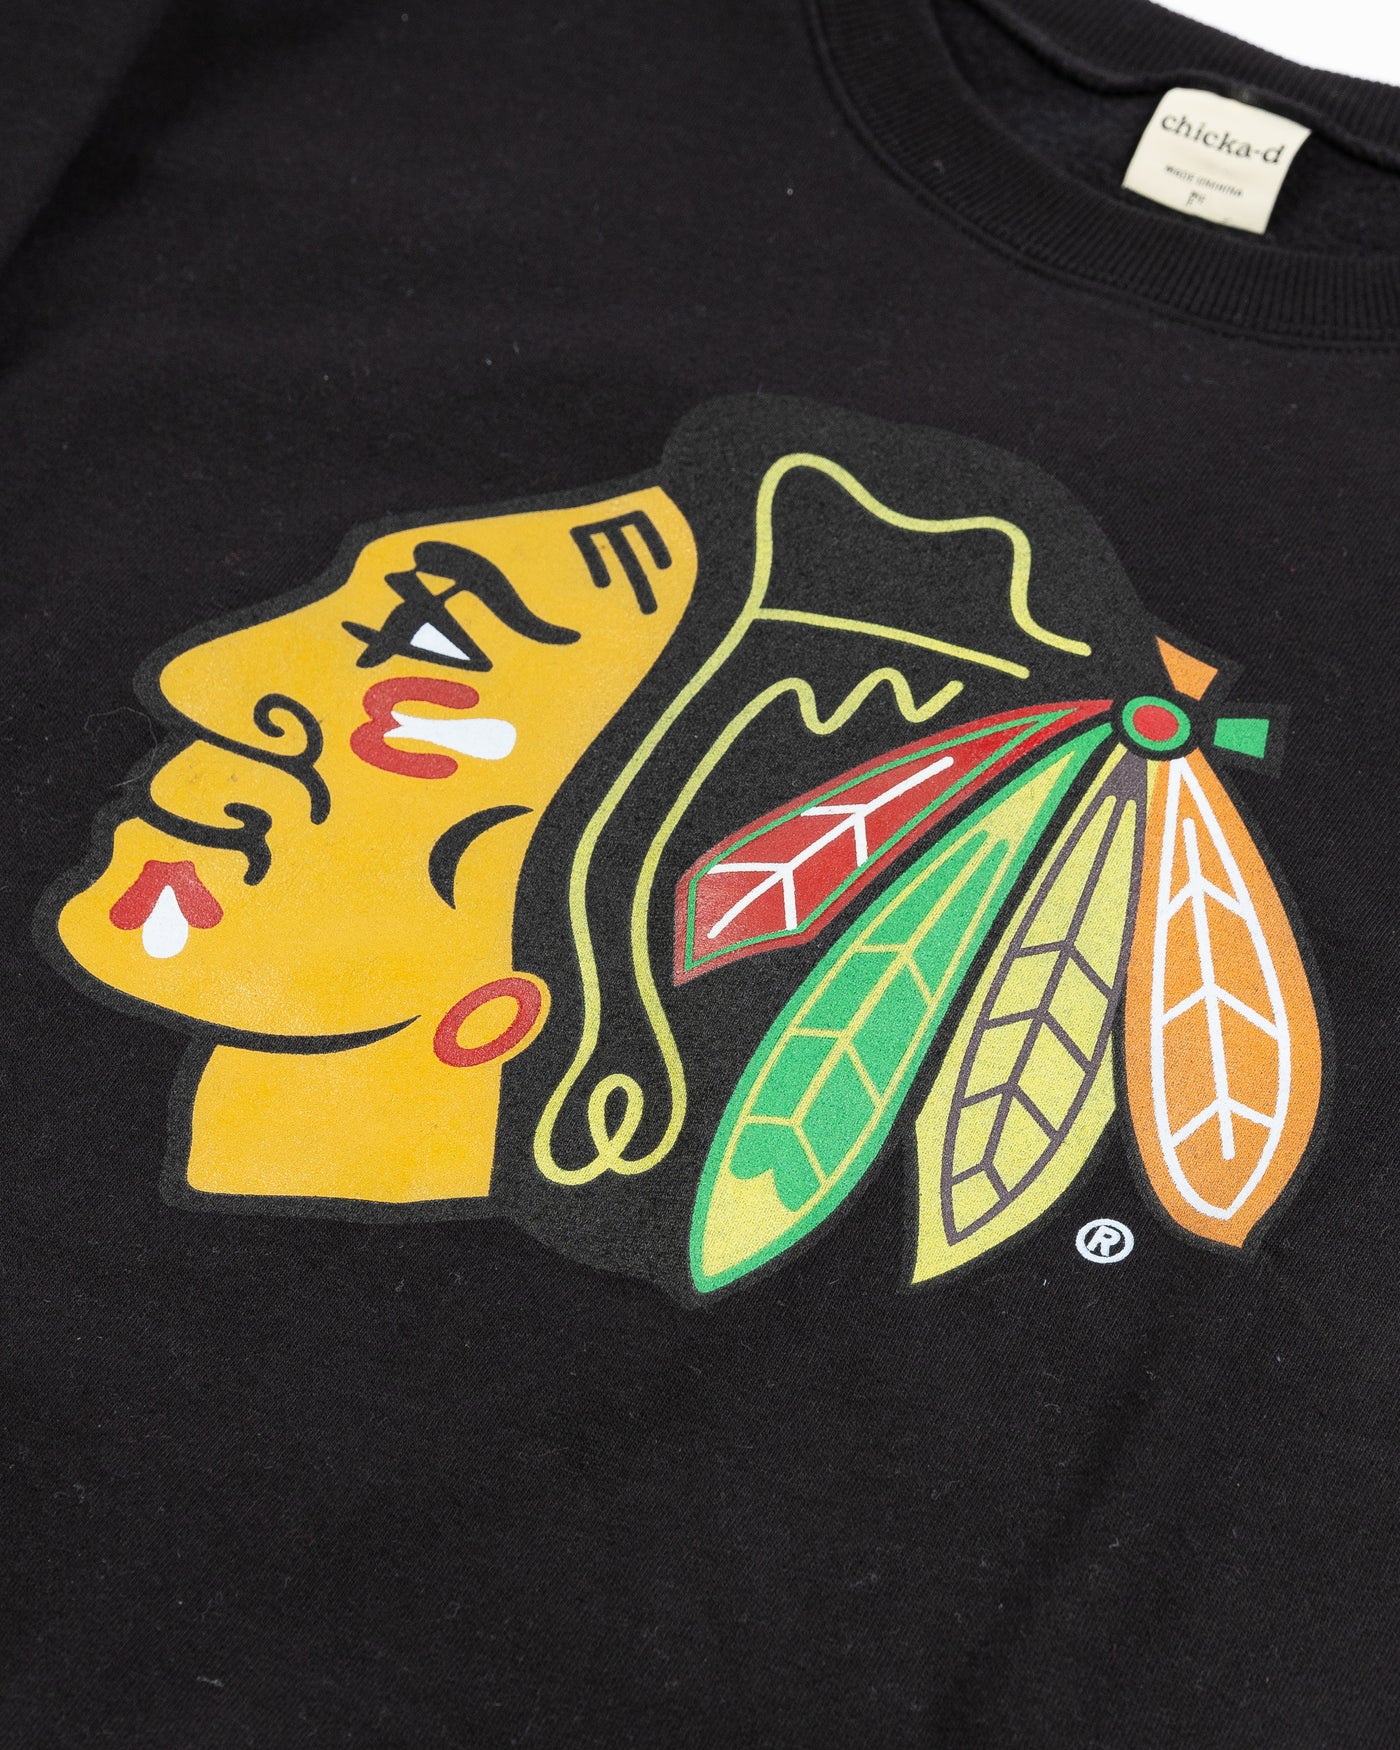 black ladies chicka-d crewneck with Chicago Blackhawks primary logo across chest - detail lay flat